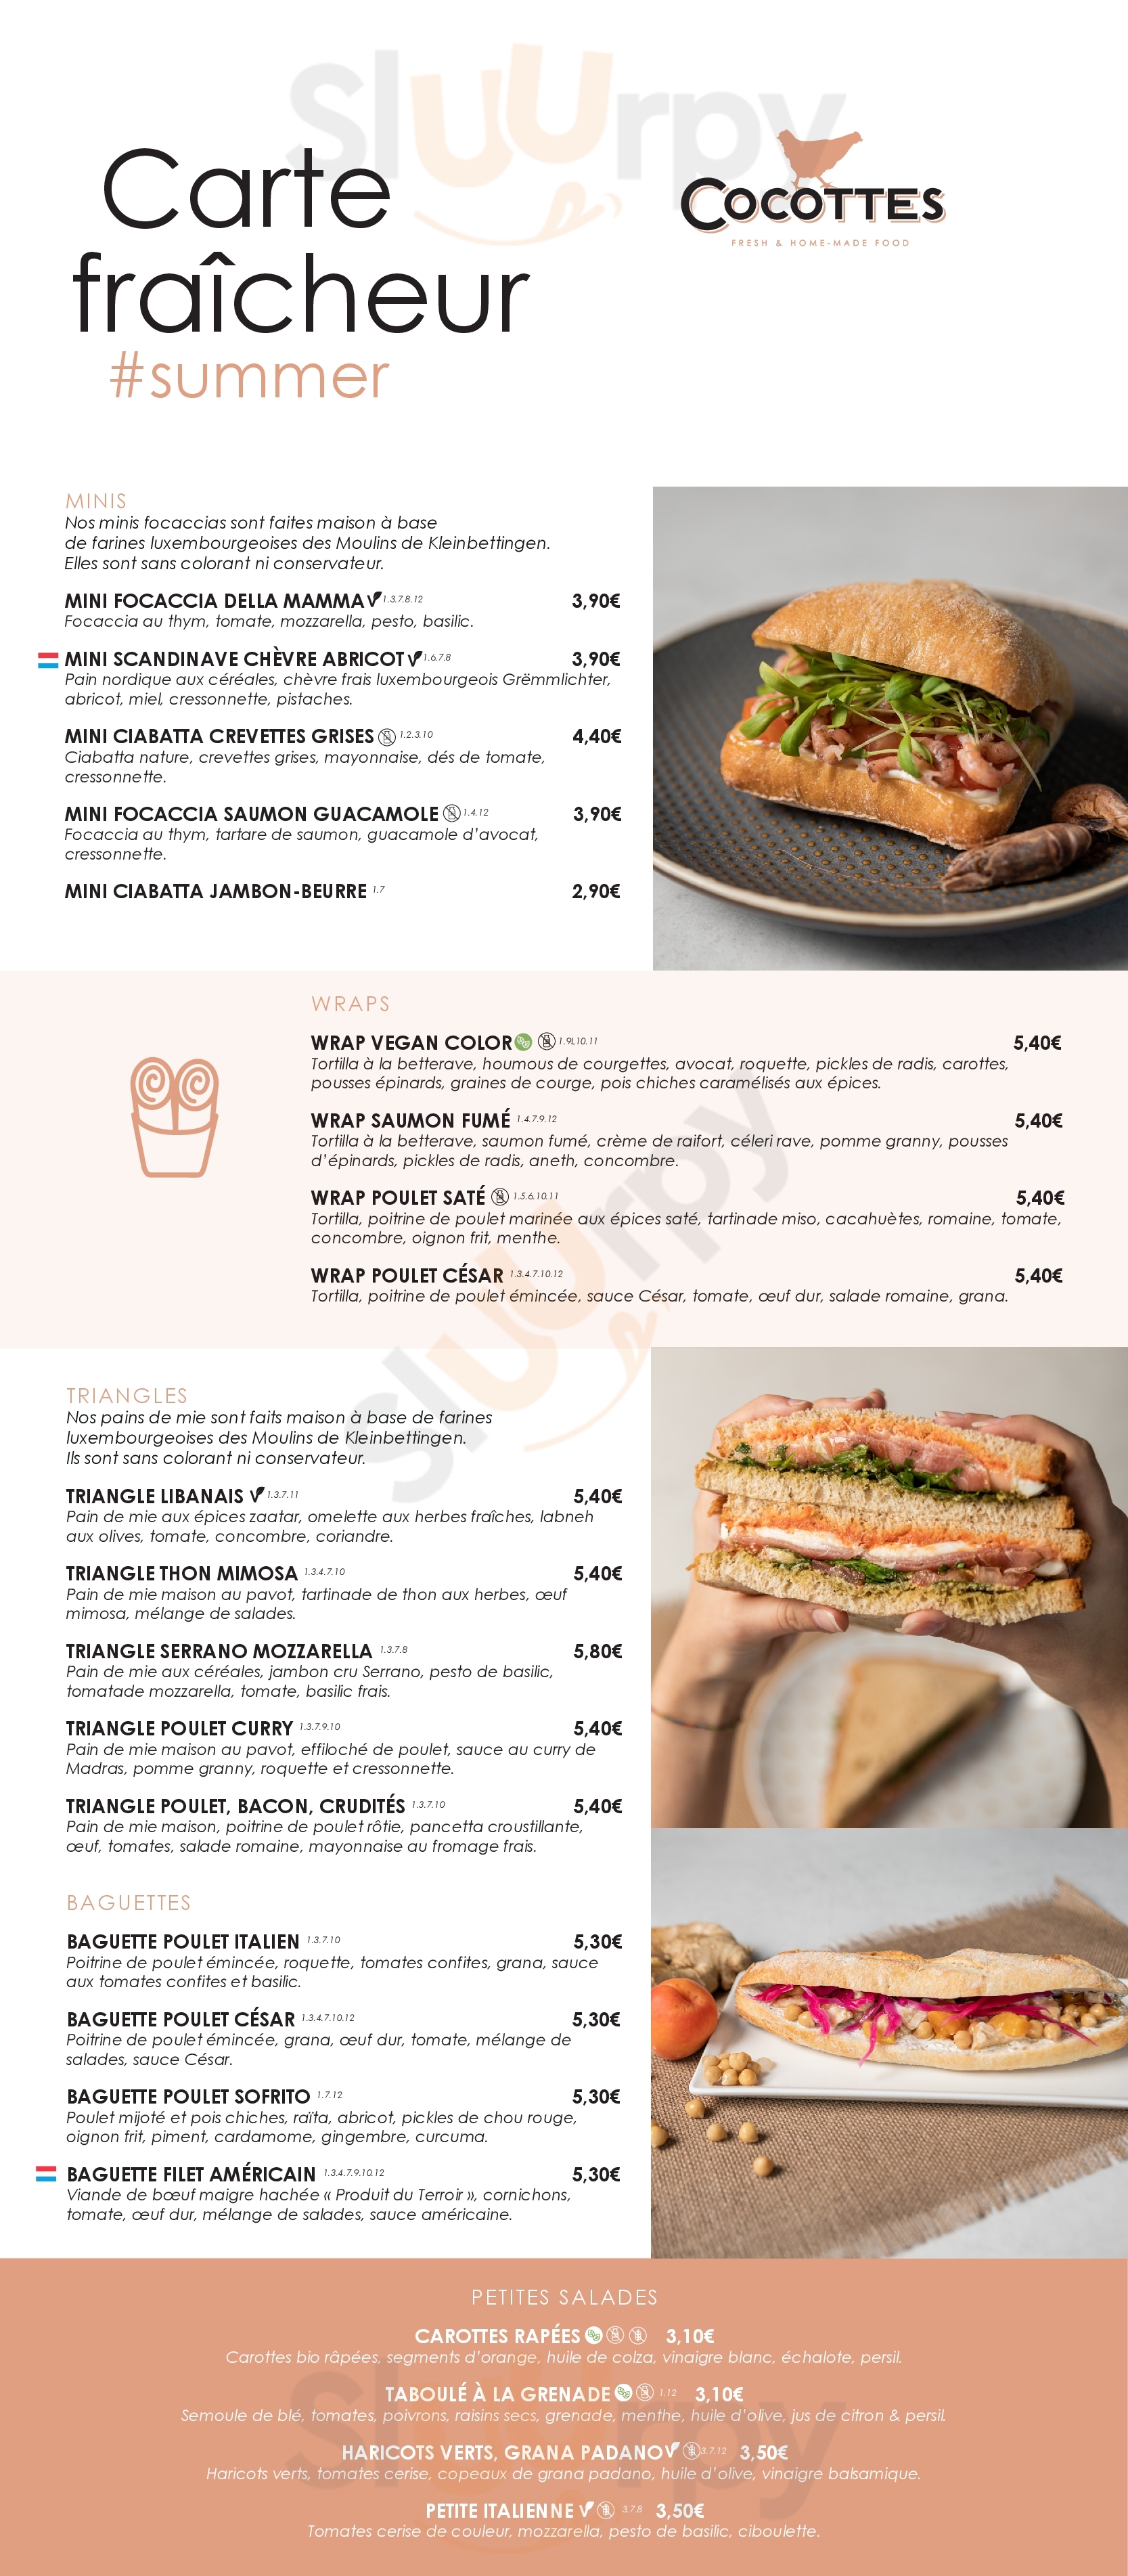 Cocottes Kirchberg Luxembourg Menu - 1